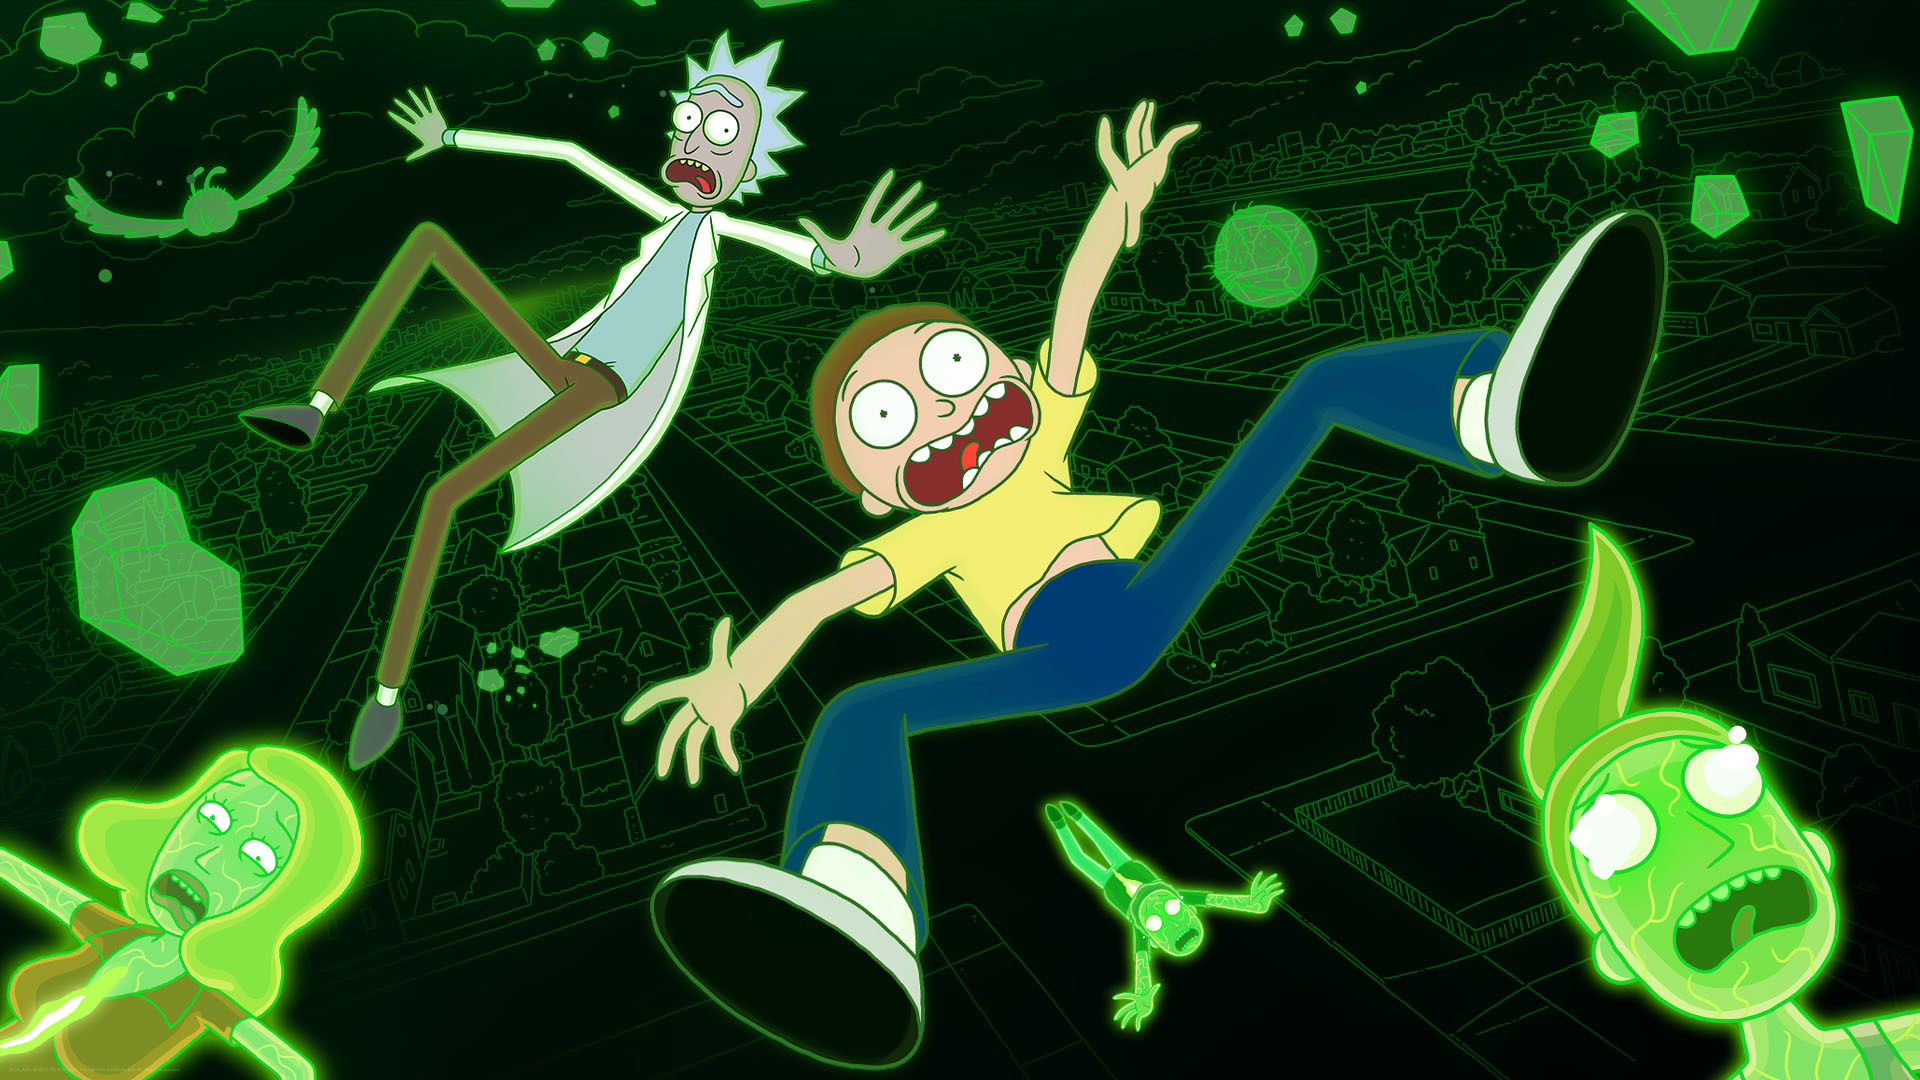 Rick and Morty Premiere #1 Most-Viewed Cable Program With Young Viewers Warner Bros